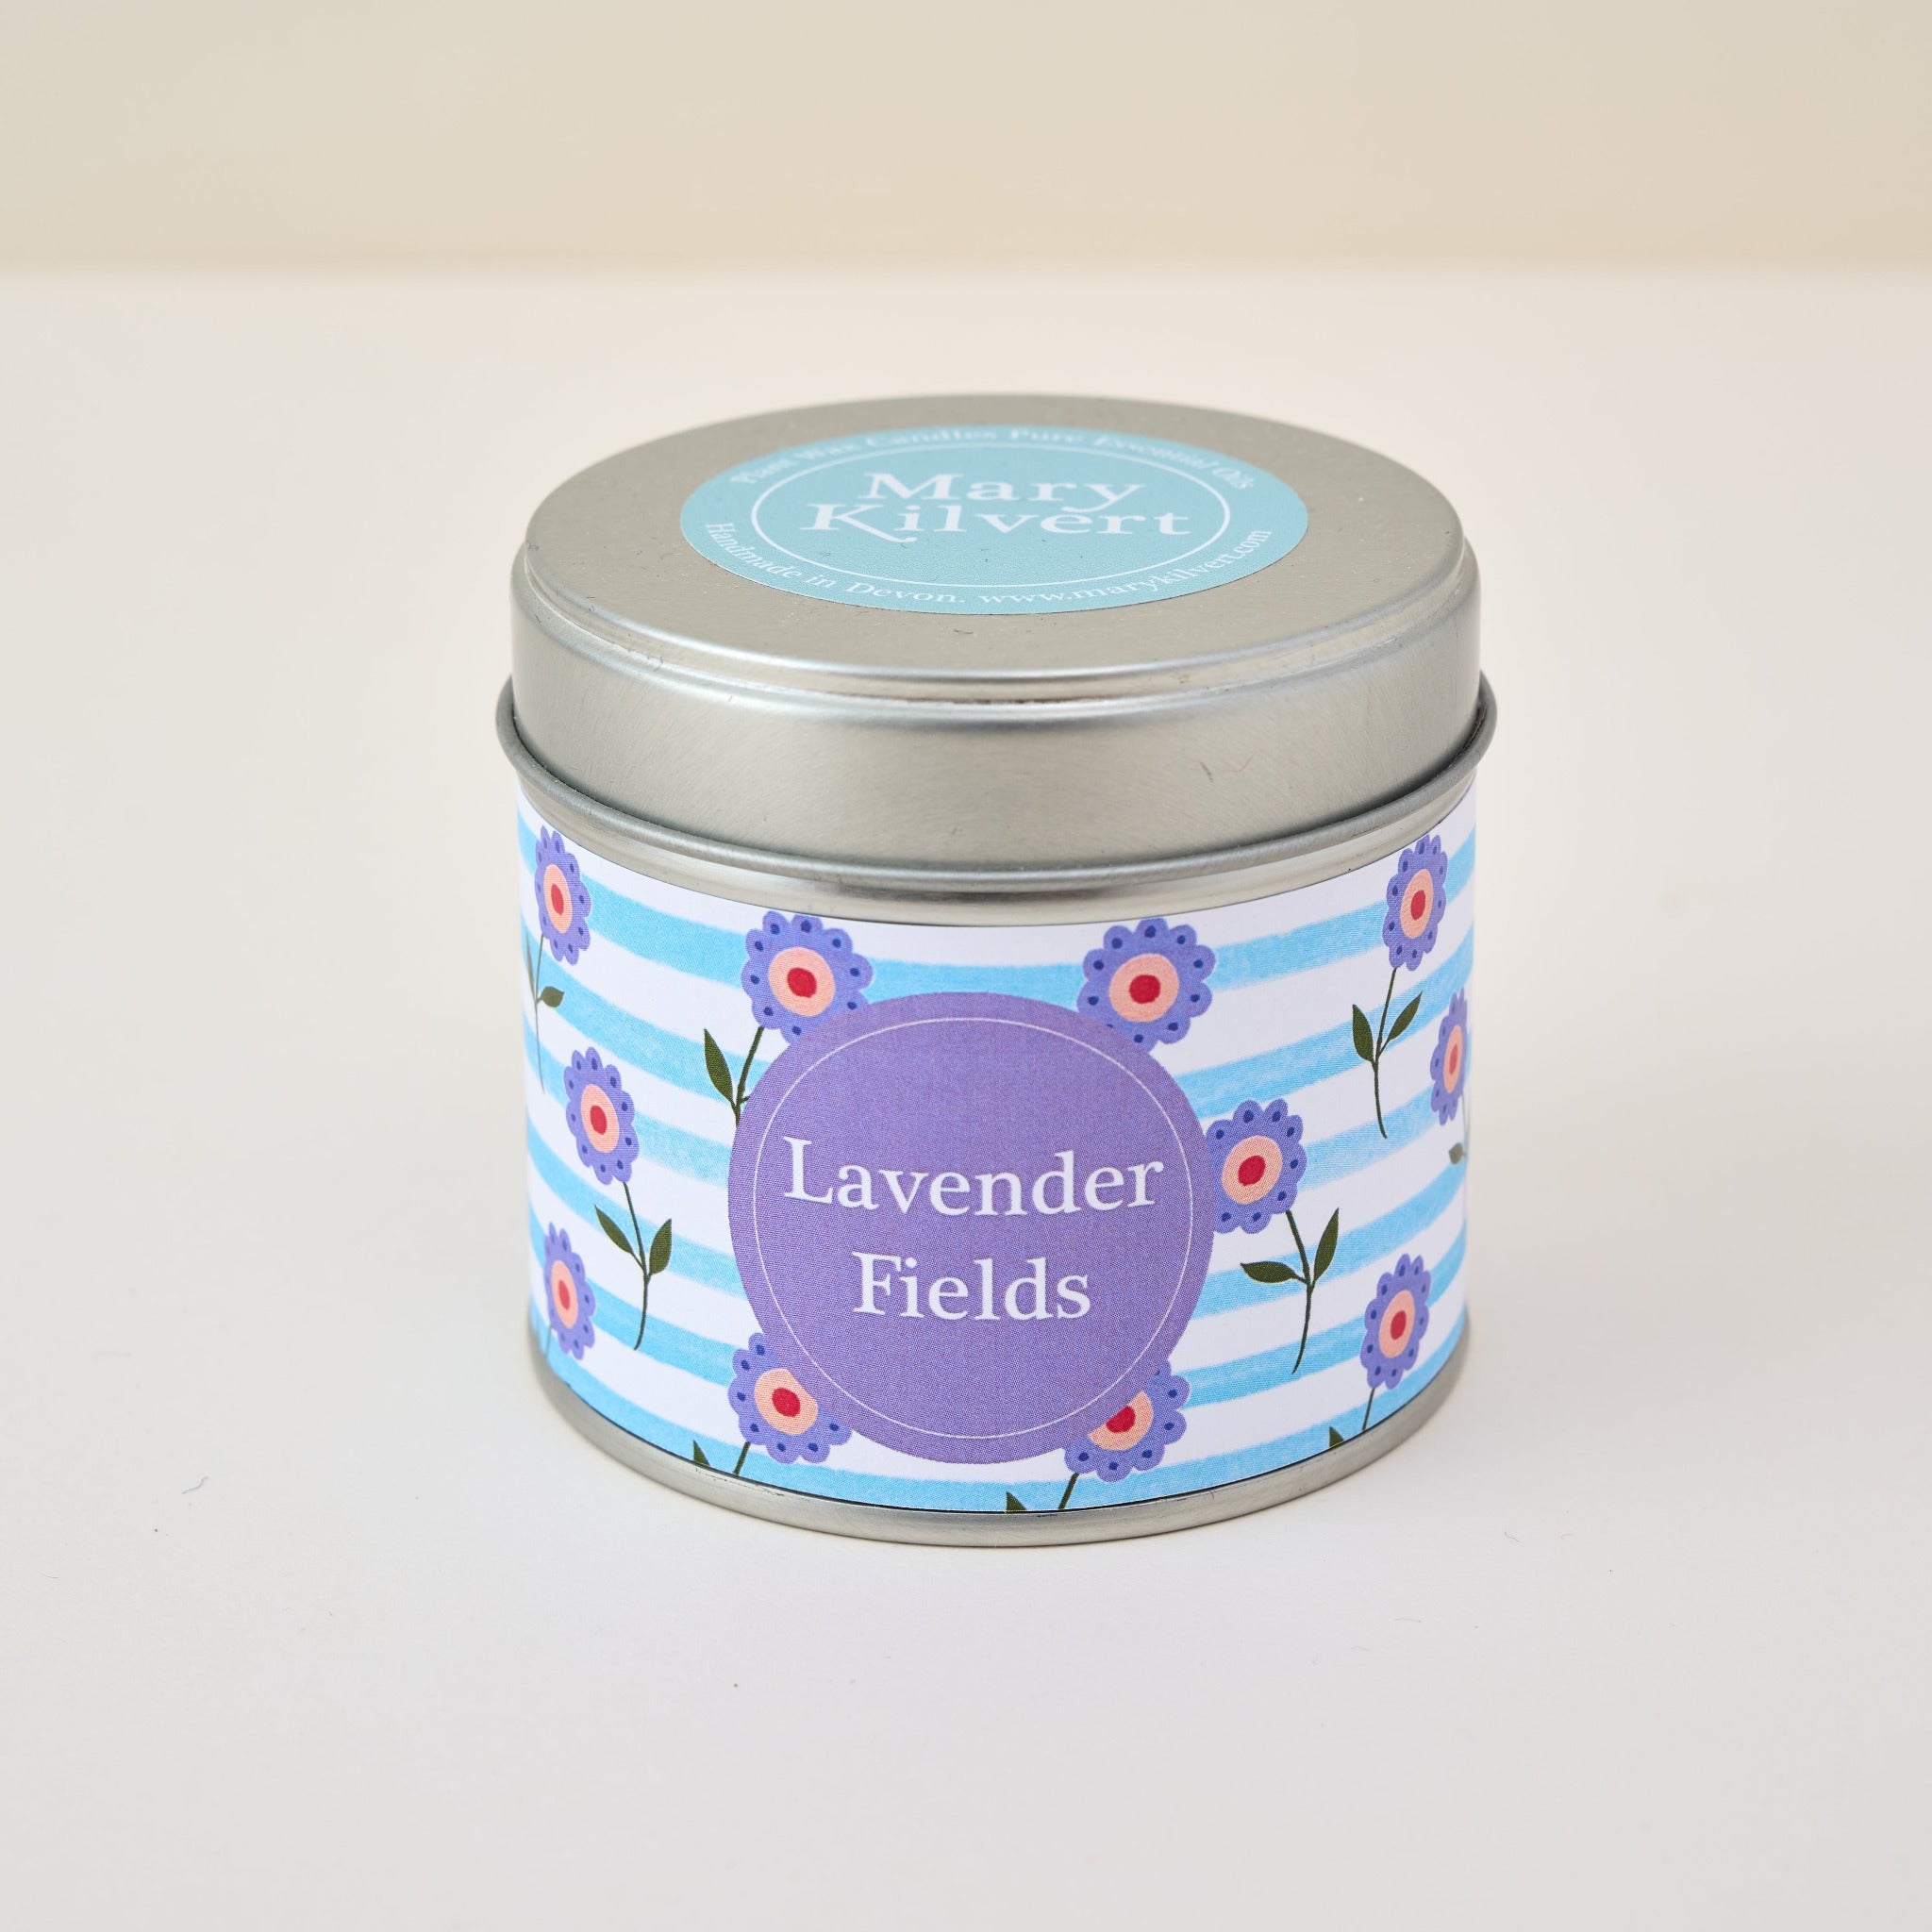 Lavender Fields Candle by Mary Kilvert